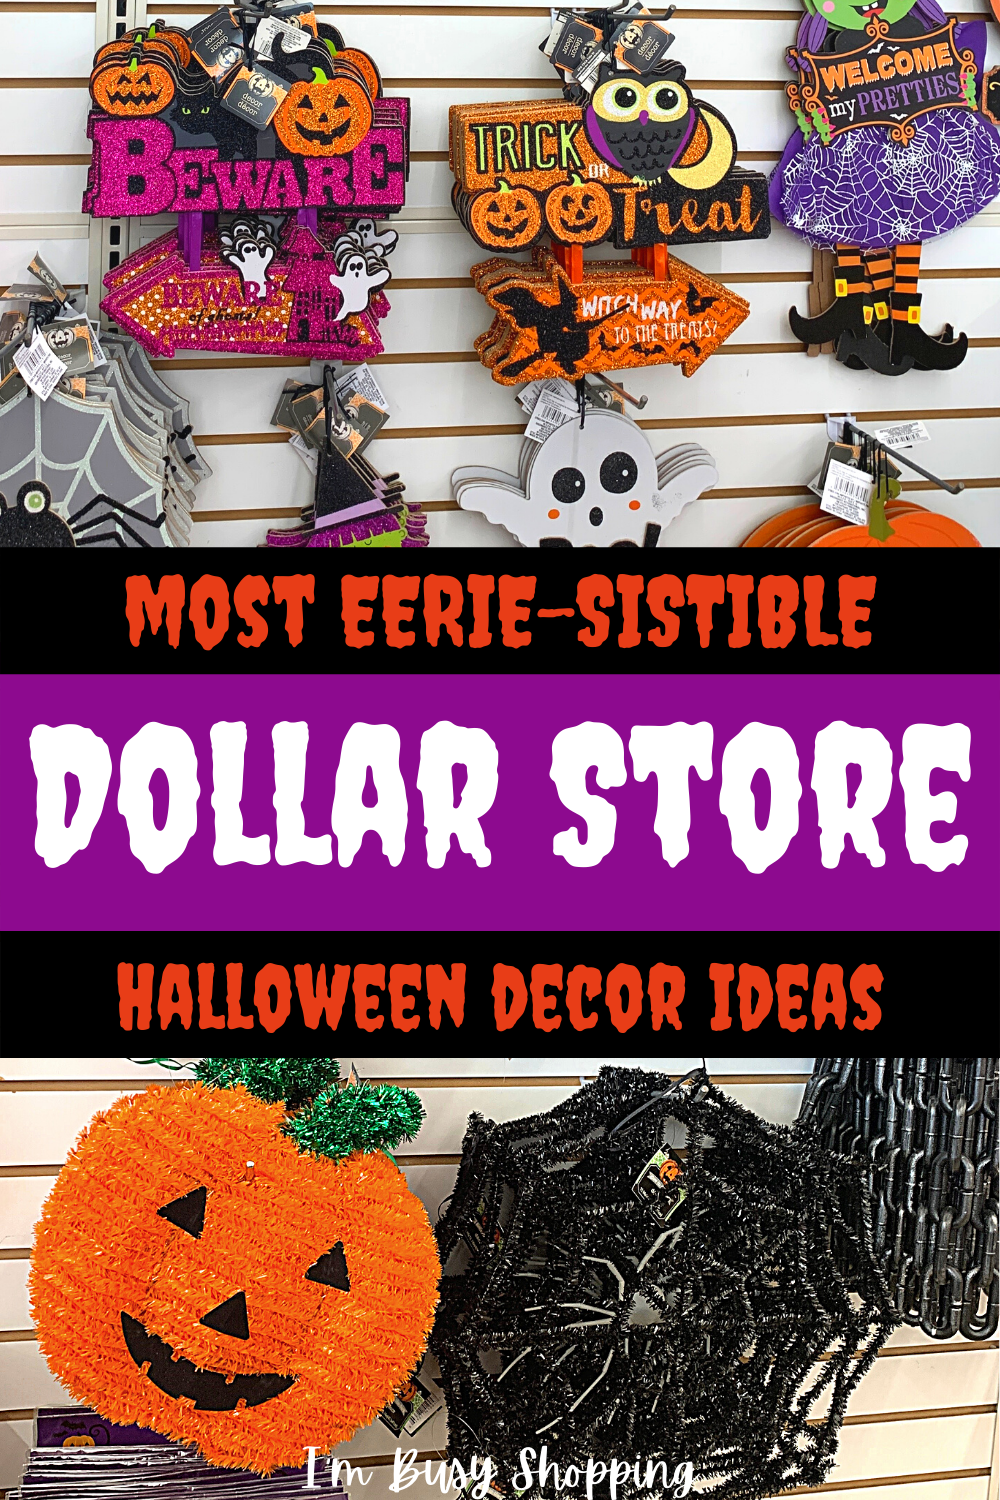 Pin showing the title Most Eerie-sistible Dollar Store Halloween Decor Ideas